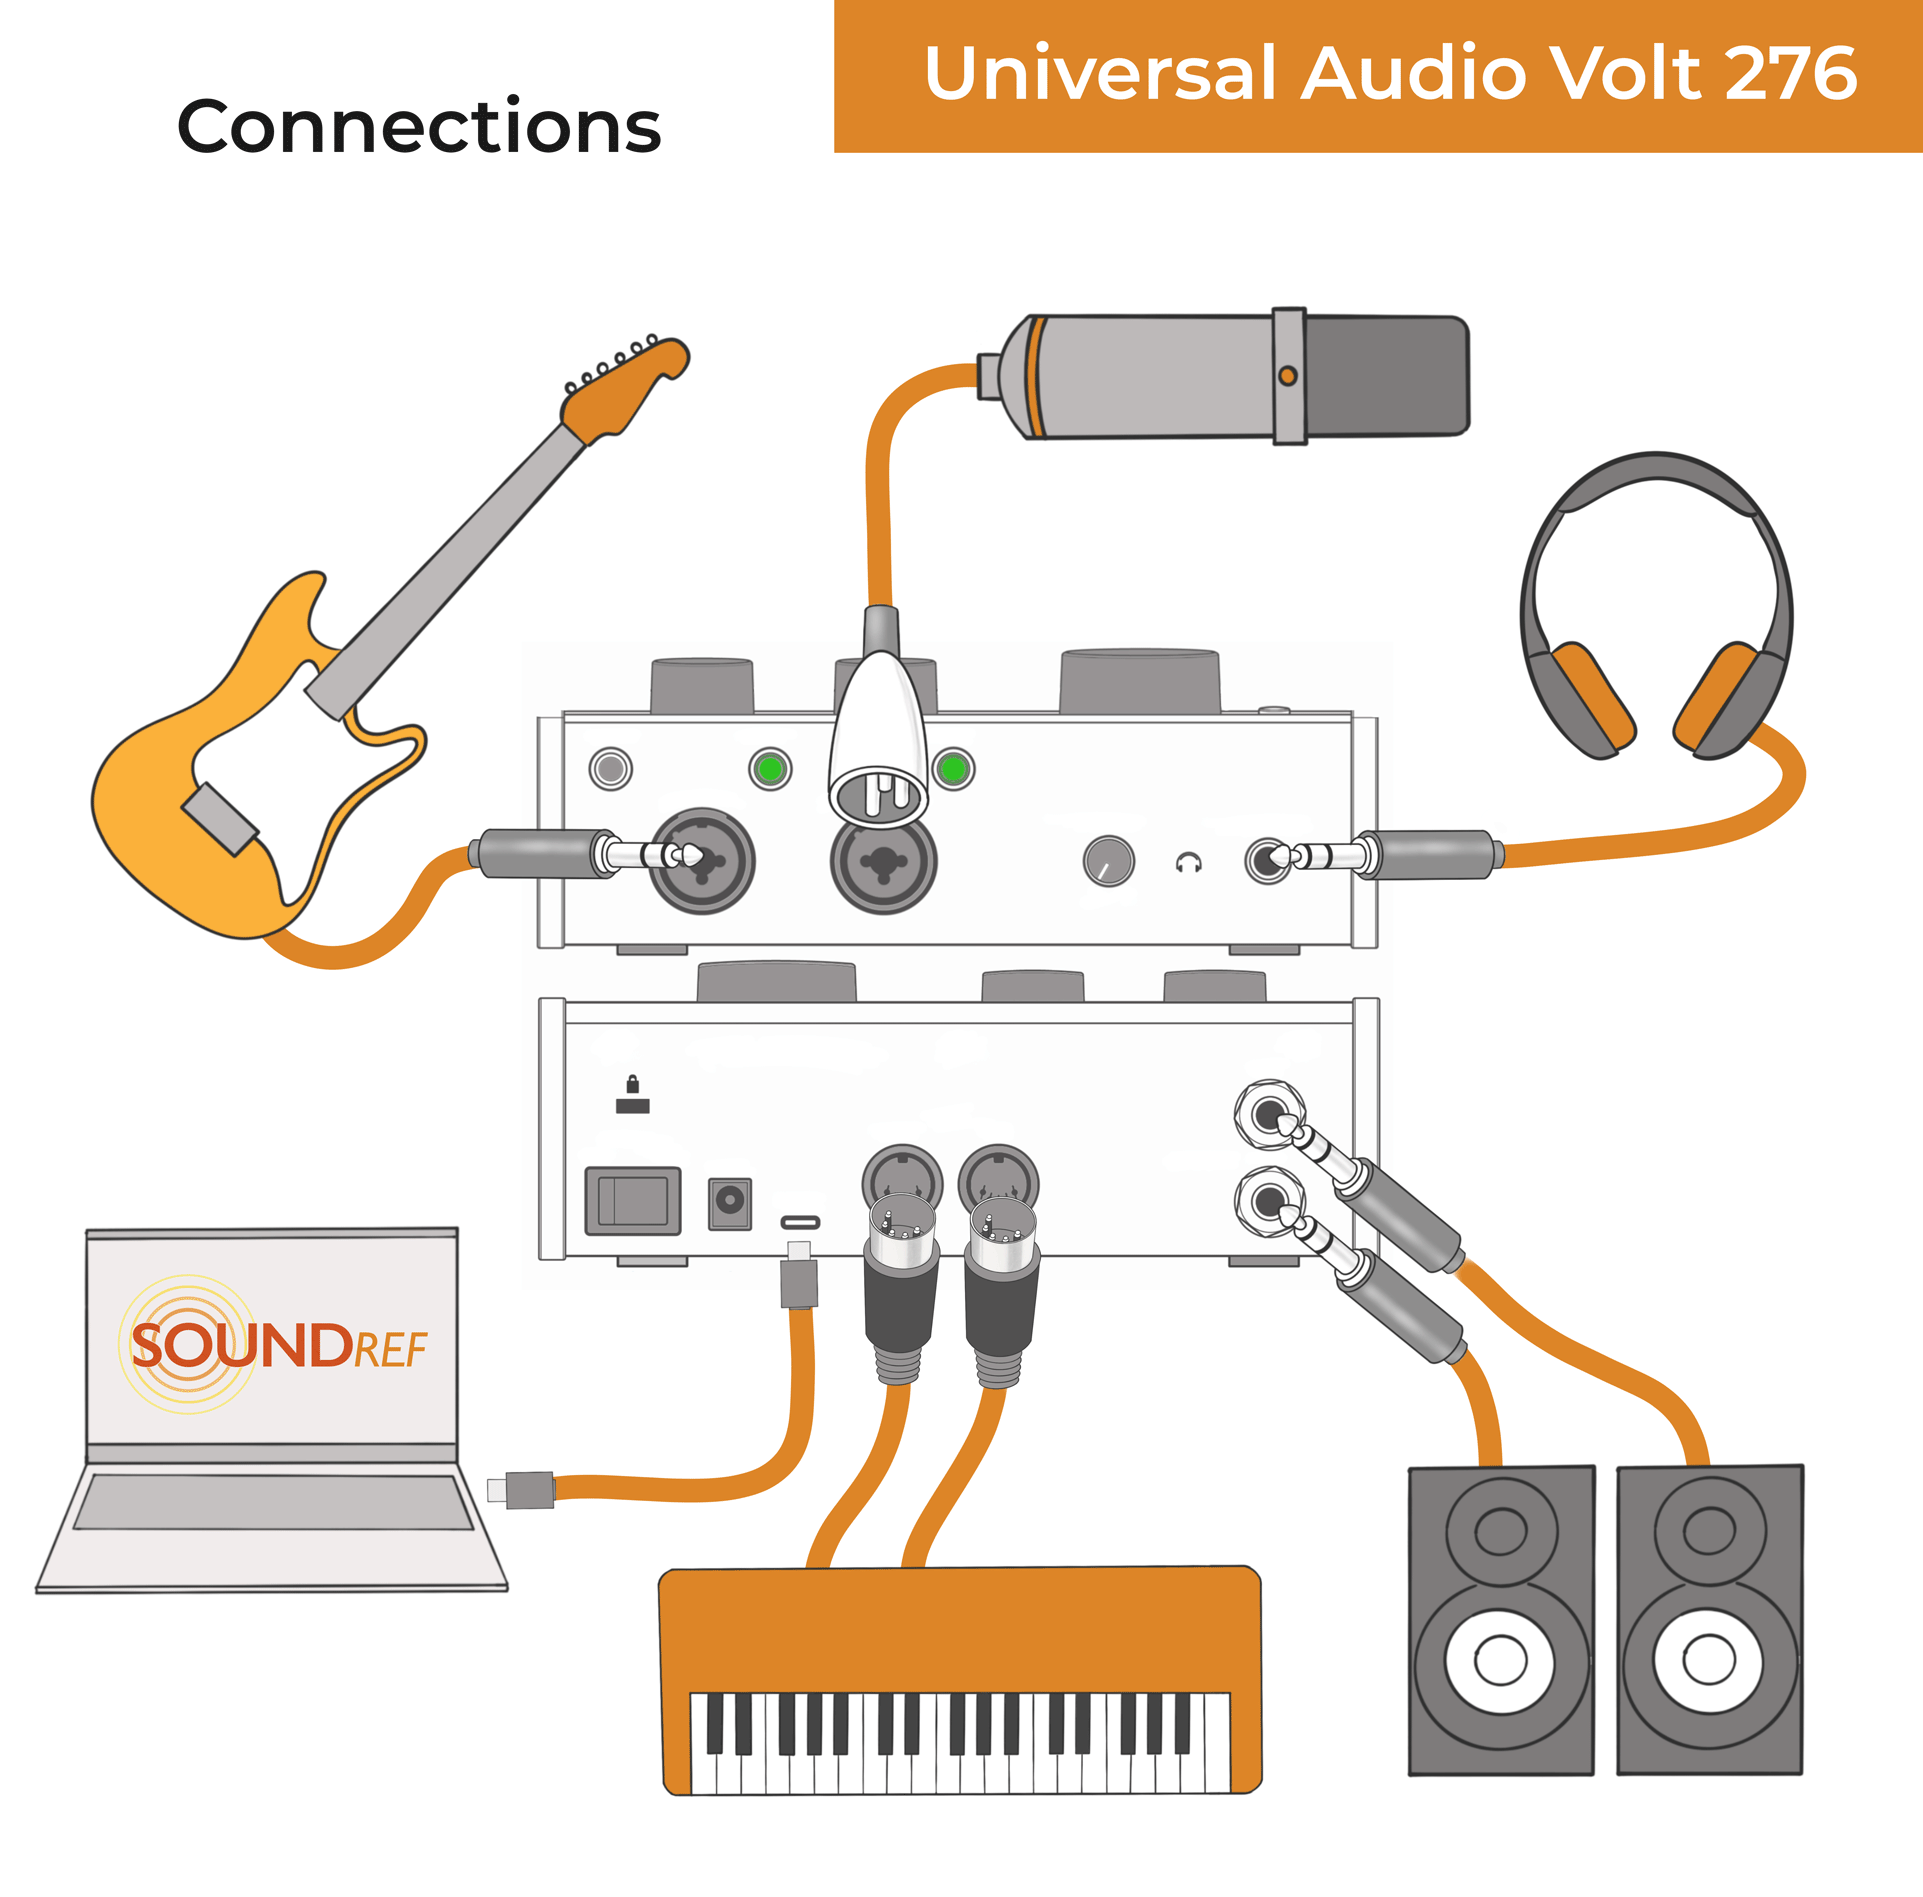 Connecting the Universal Audio Volt 276 to other instruments